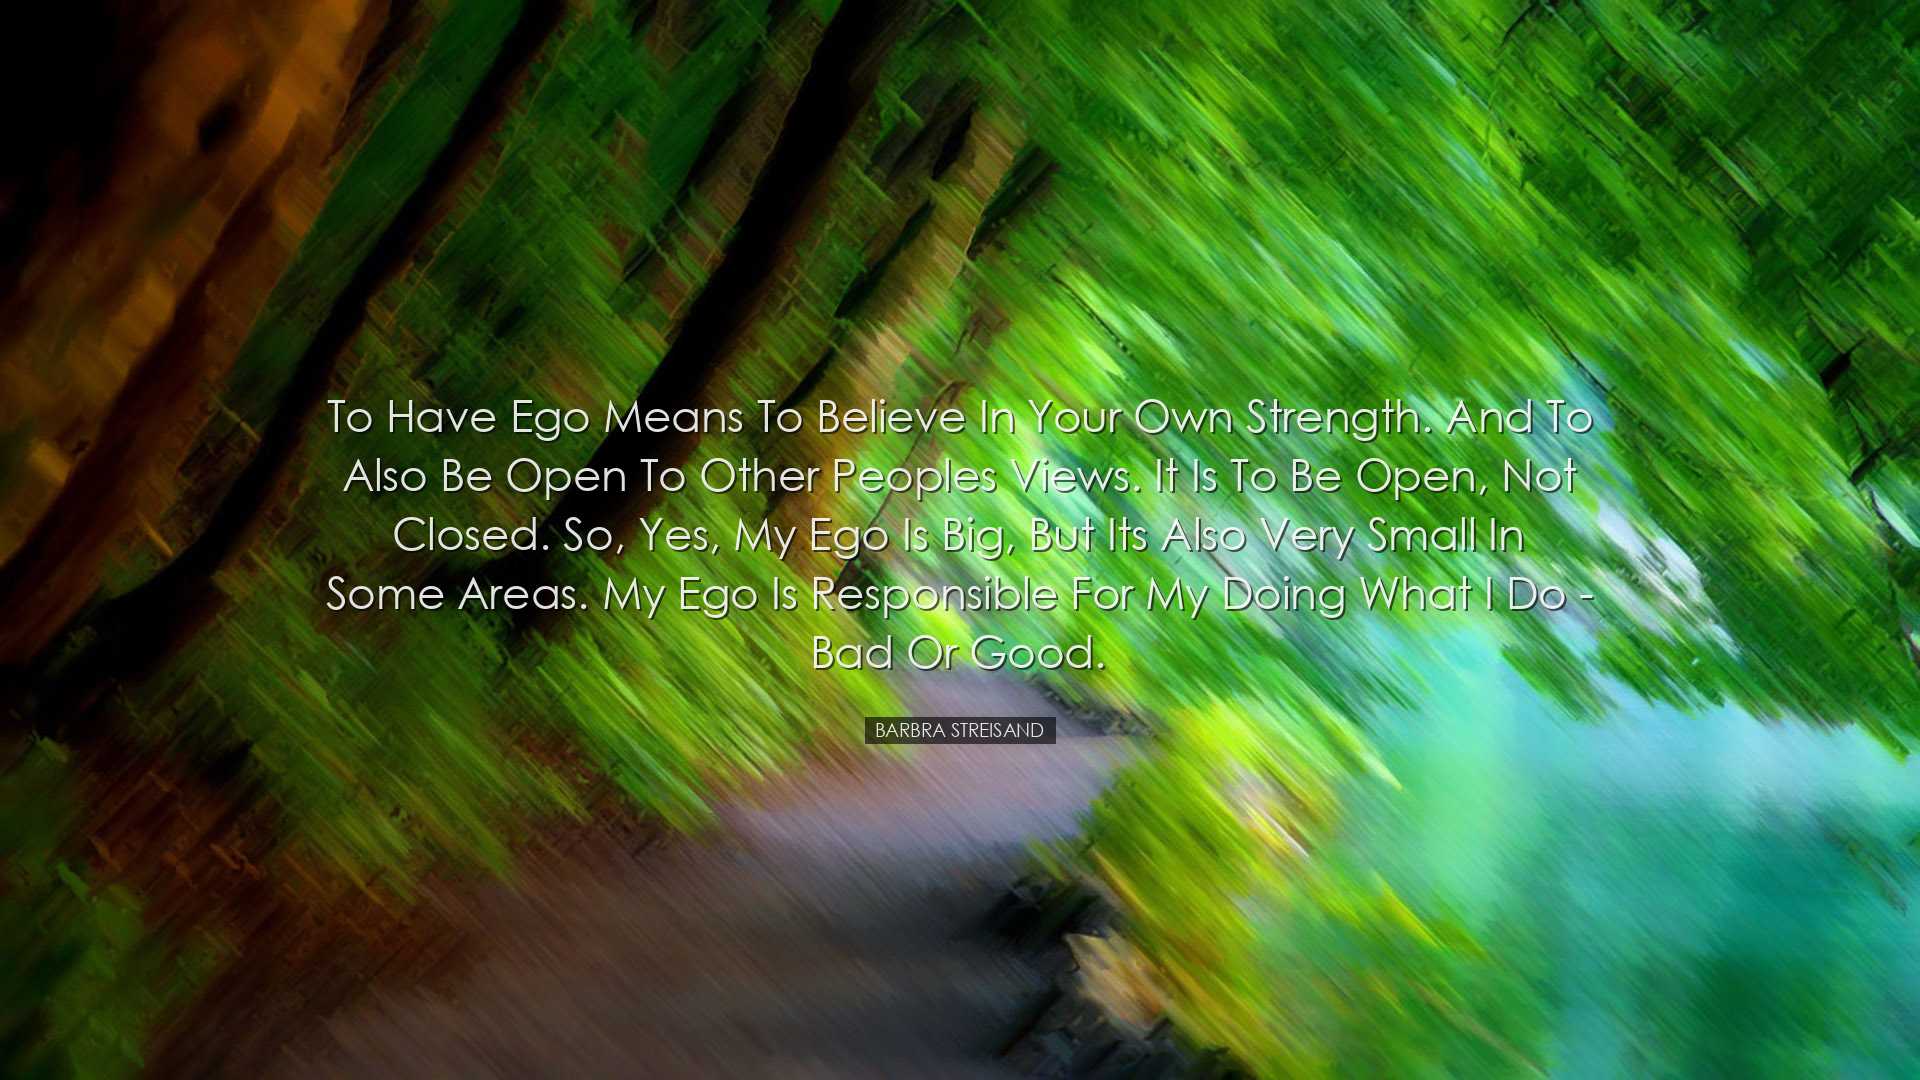 To have ego means to believe in your own strength. And to also be